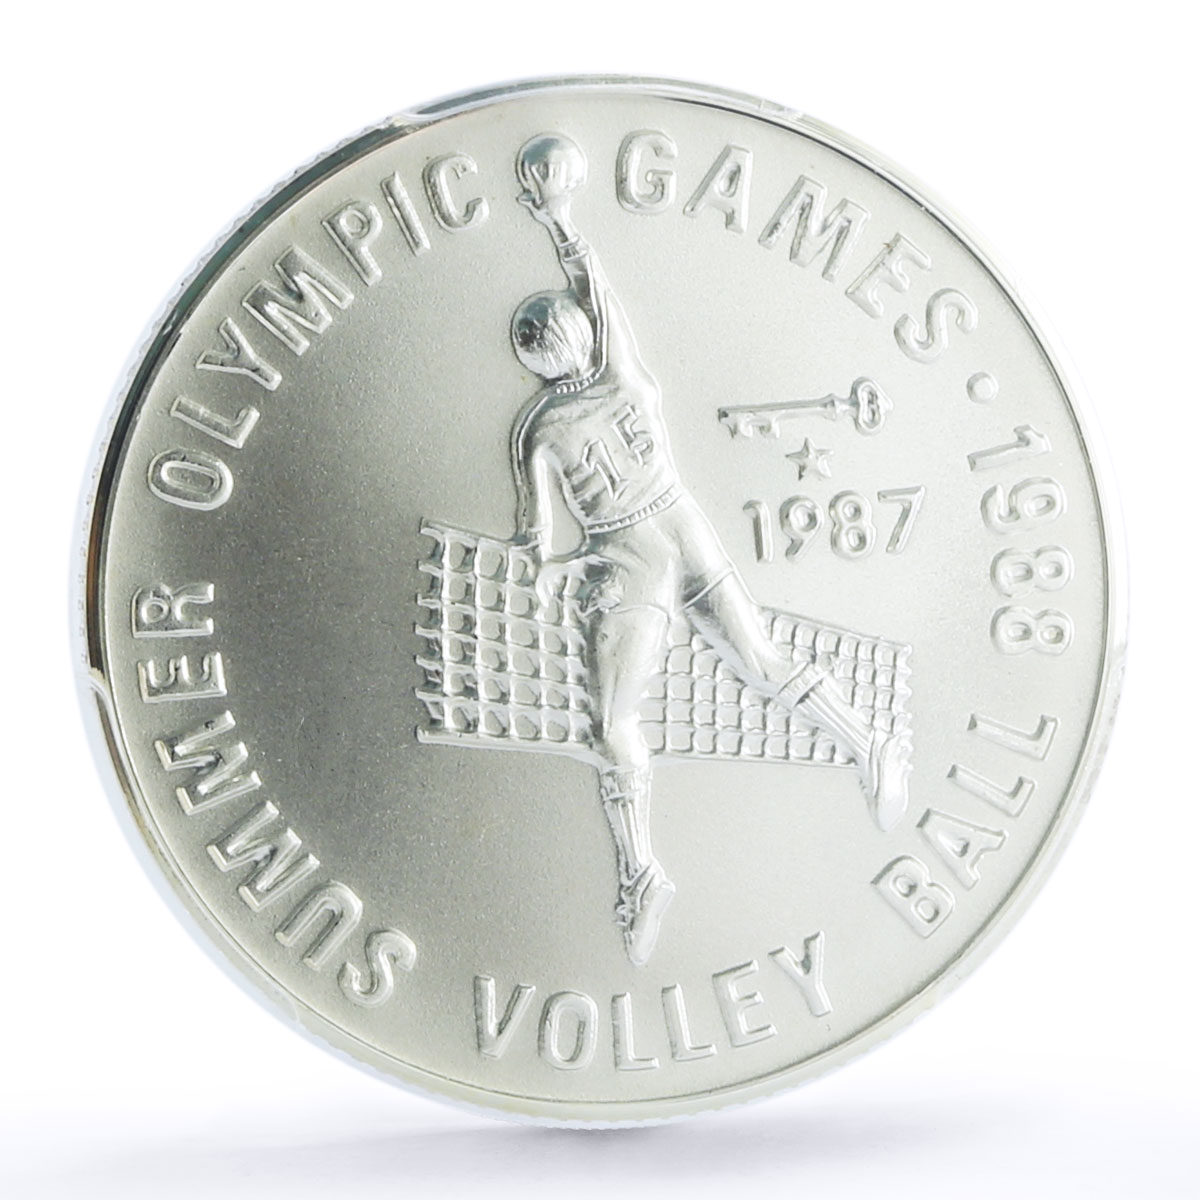 Afghanistan 500 Afg 1988 Summer Olympics Volleyball MS69 PCGS silver coin 1987